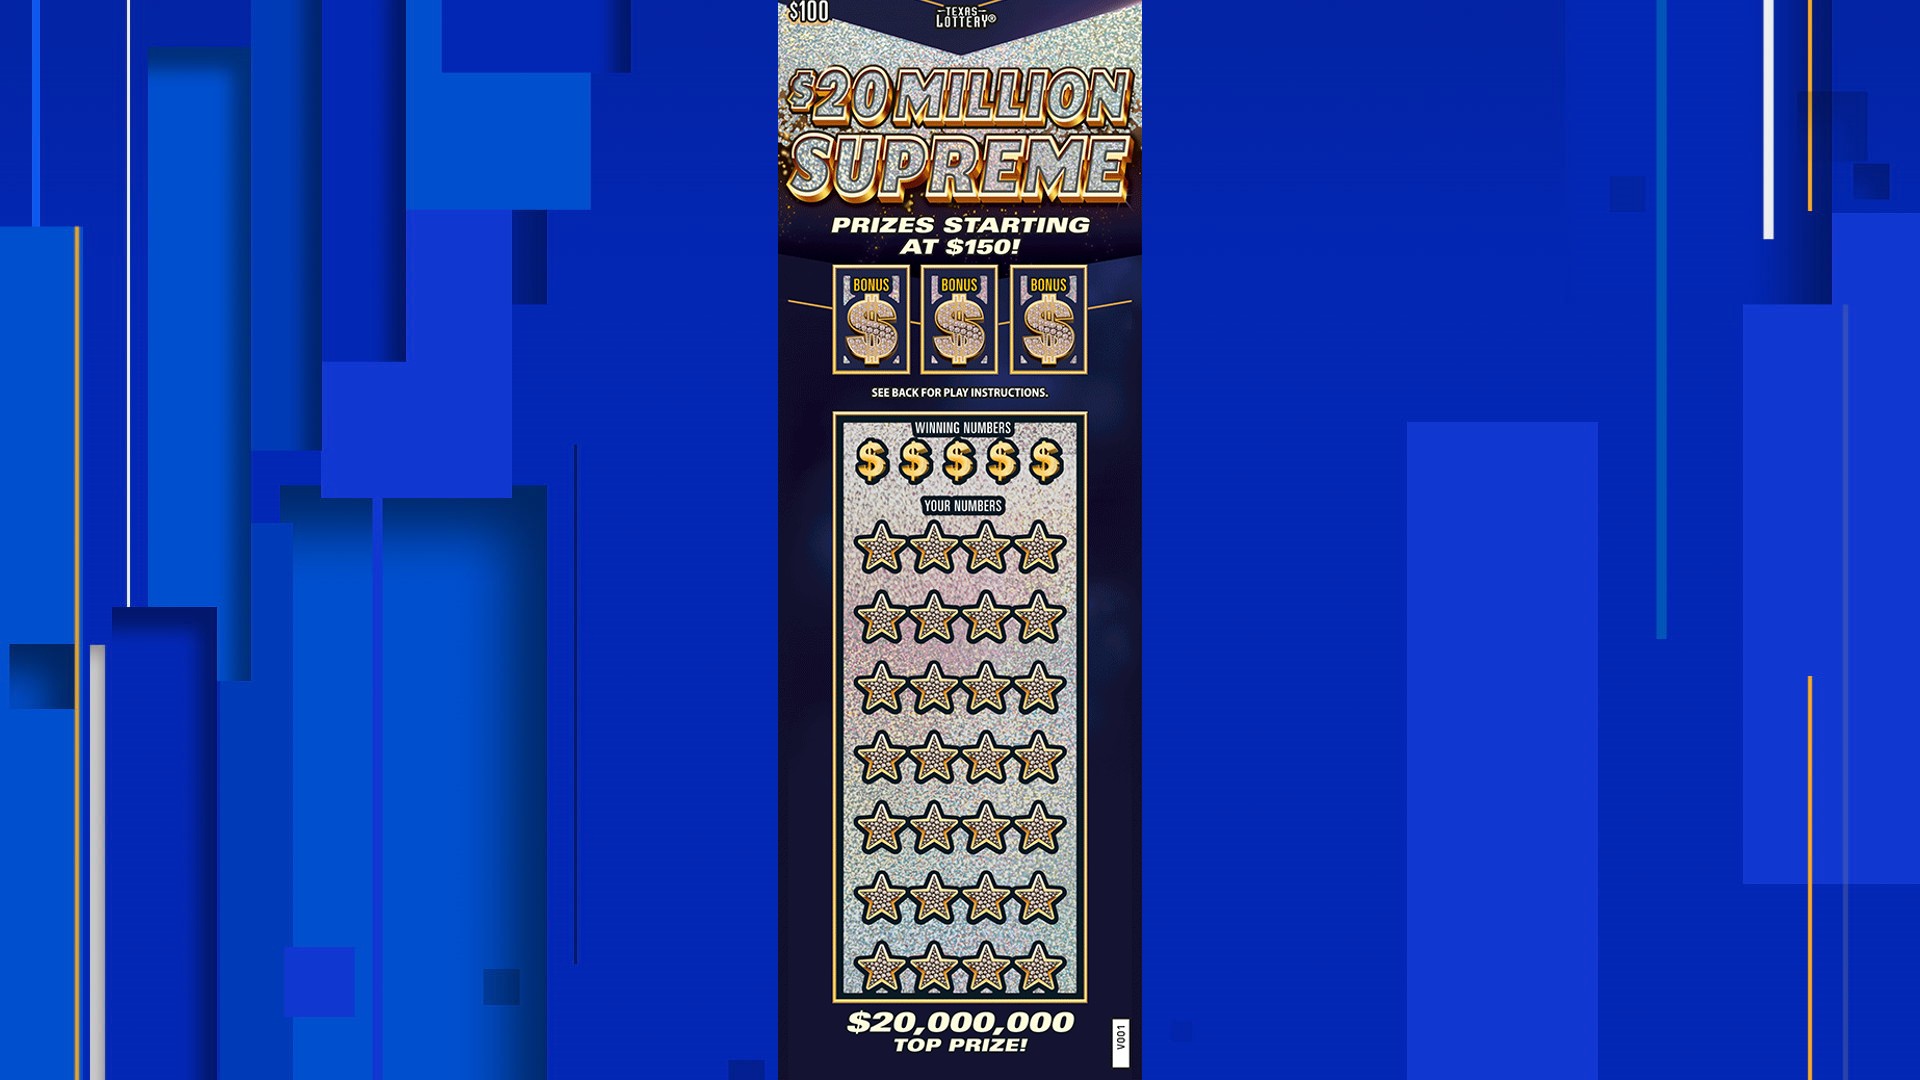 Waco, Tx News, Resident wins $1 million from scratch off